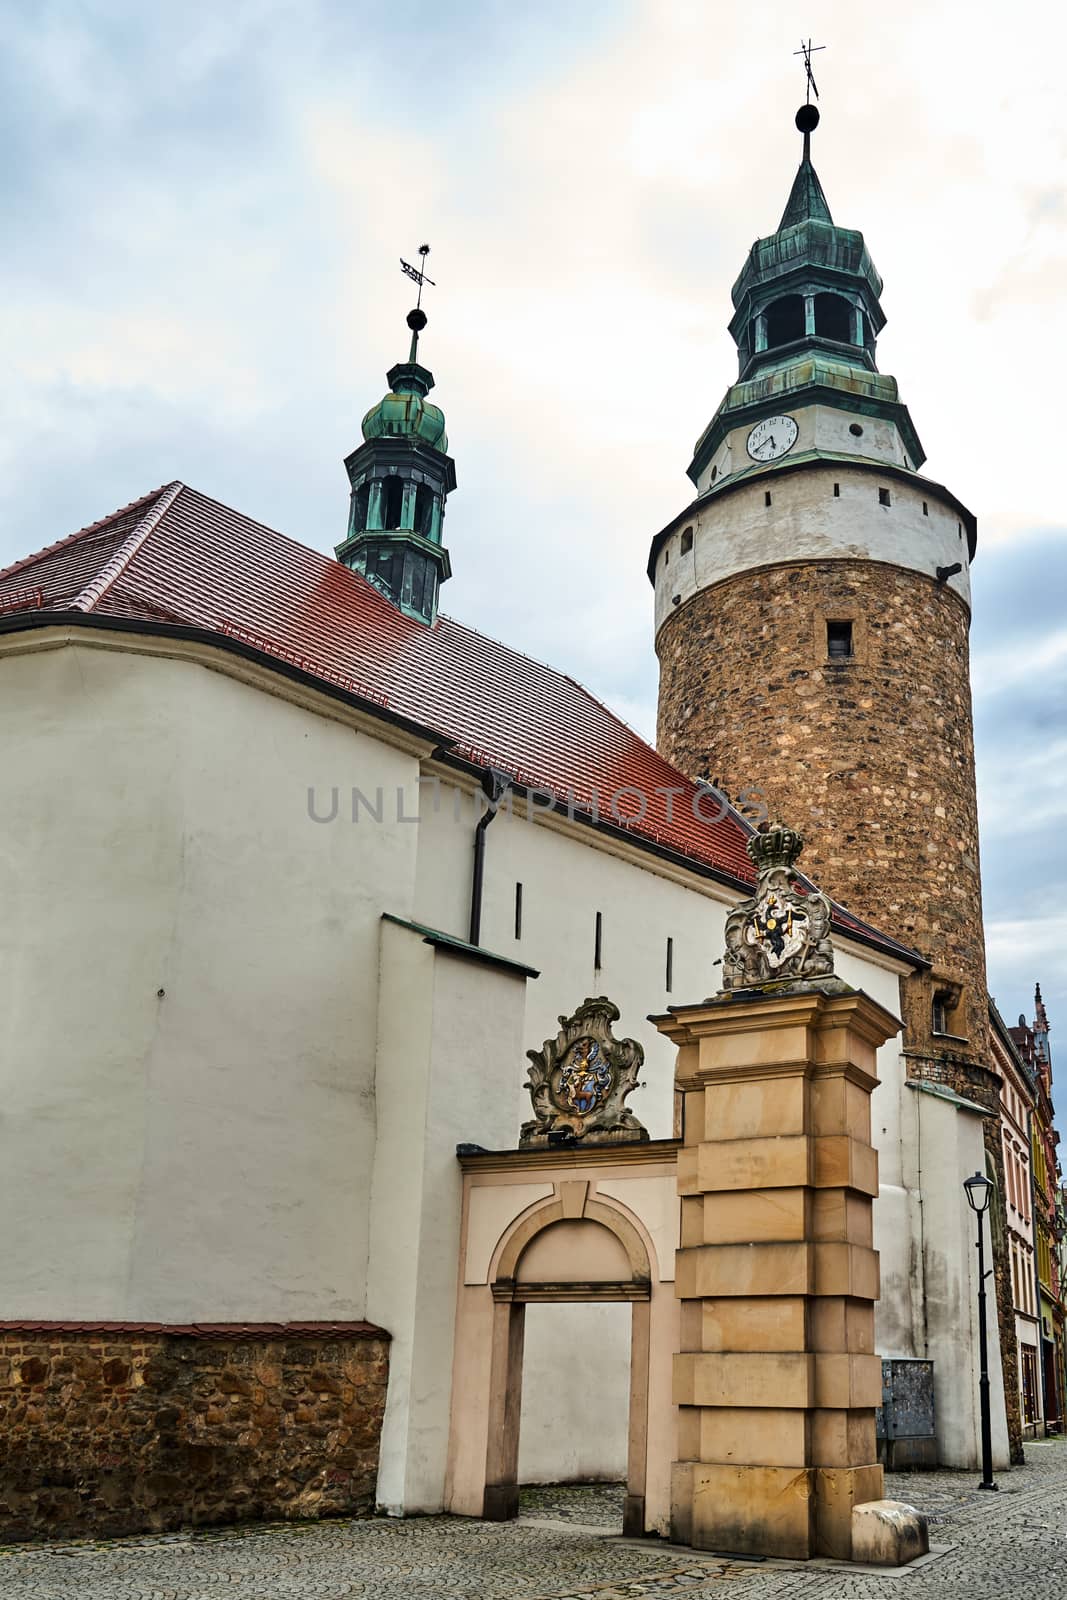 A medieval, stone church with a bell tower and a fragment of the city gate in Jelenia Gora in Poland